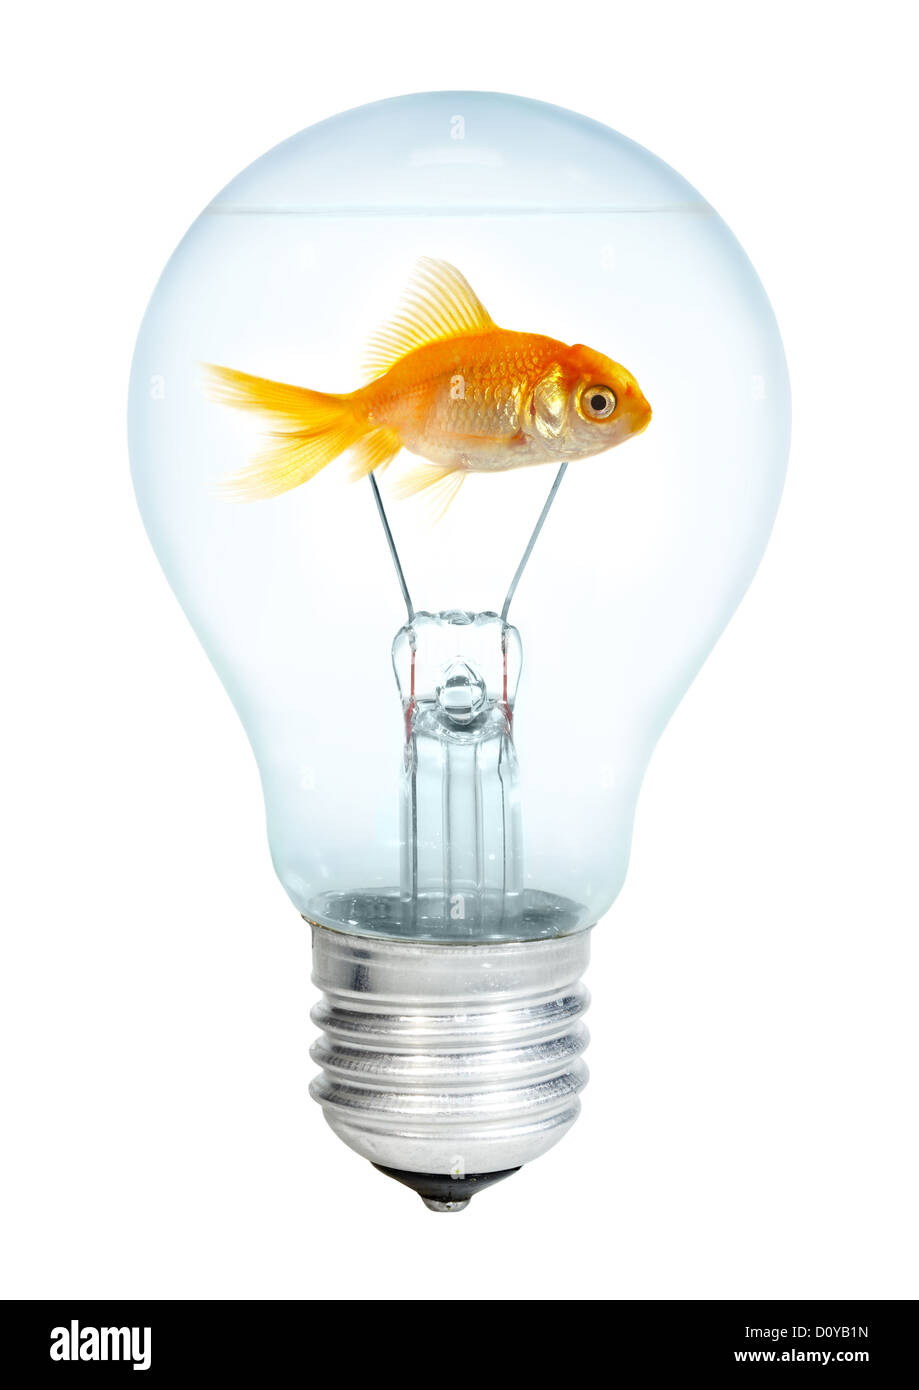 Gold small fish in light bulb Stock Photo